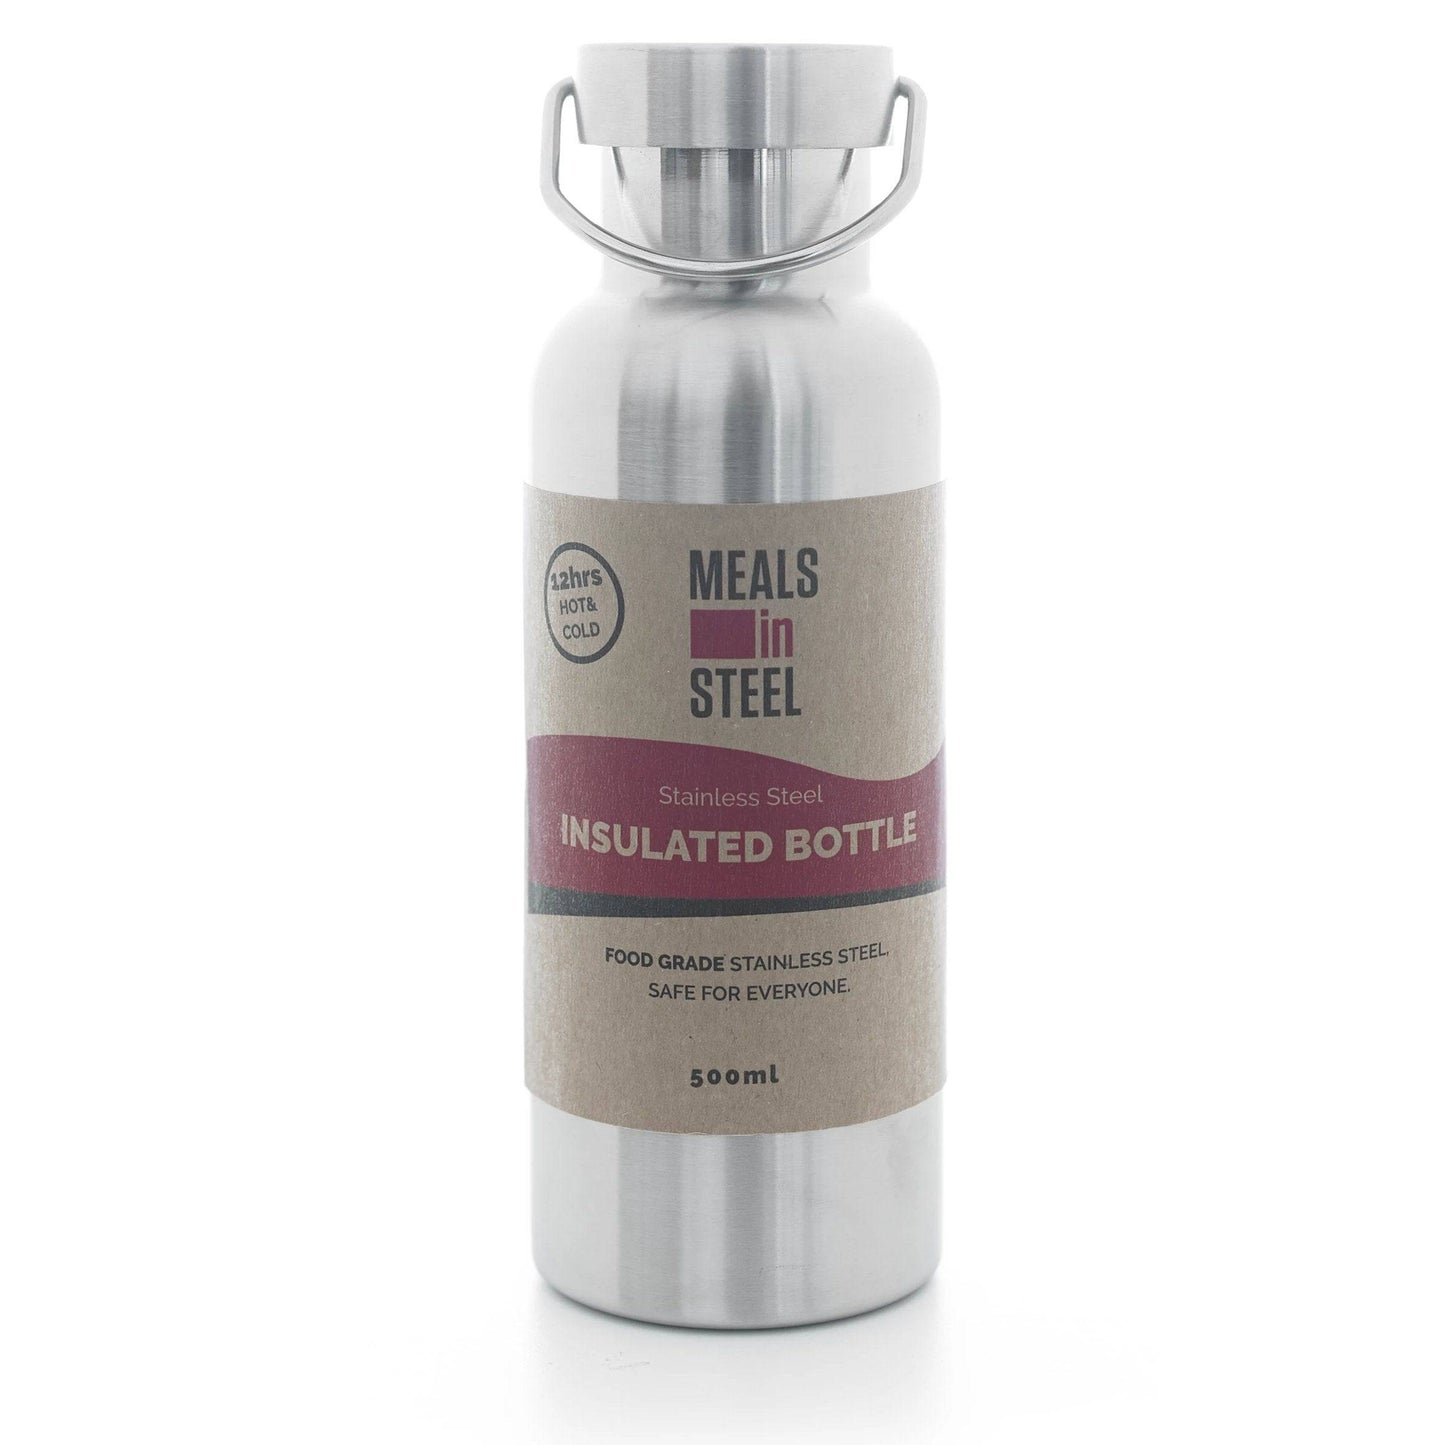 Meals In Steel Insulated Drink Bottle Stainless Steel 500ml - LunchBox Inc.